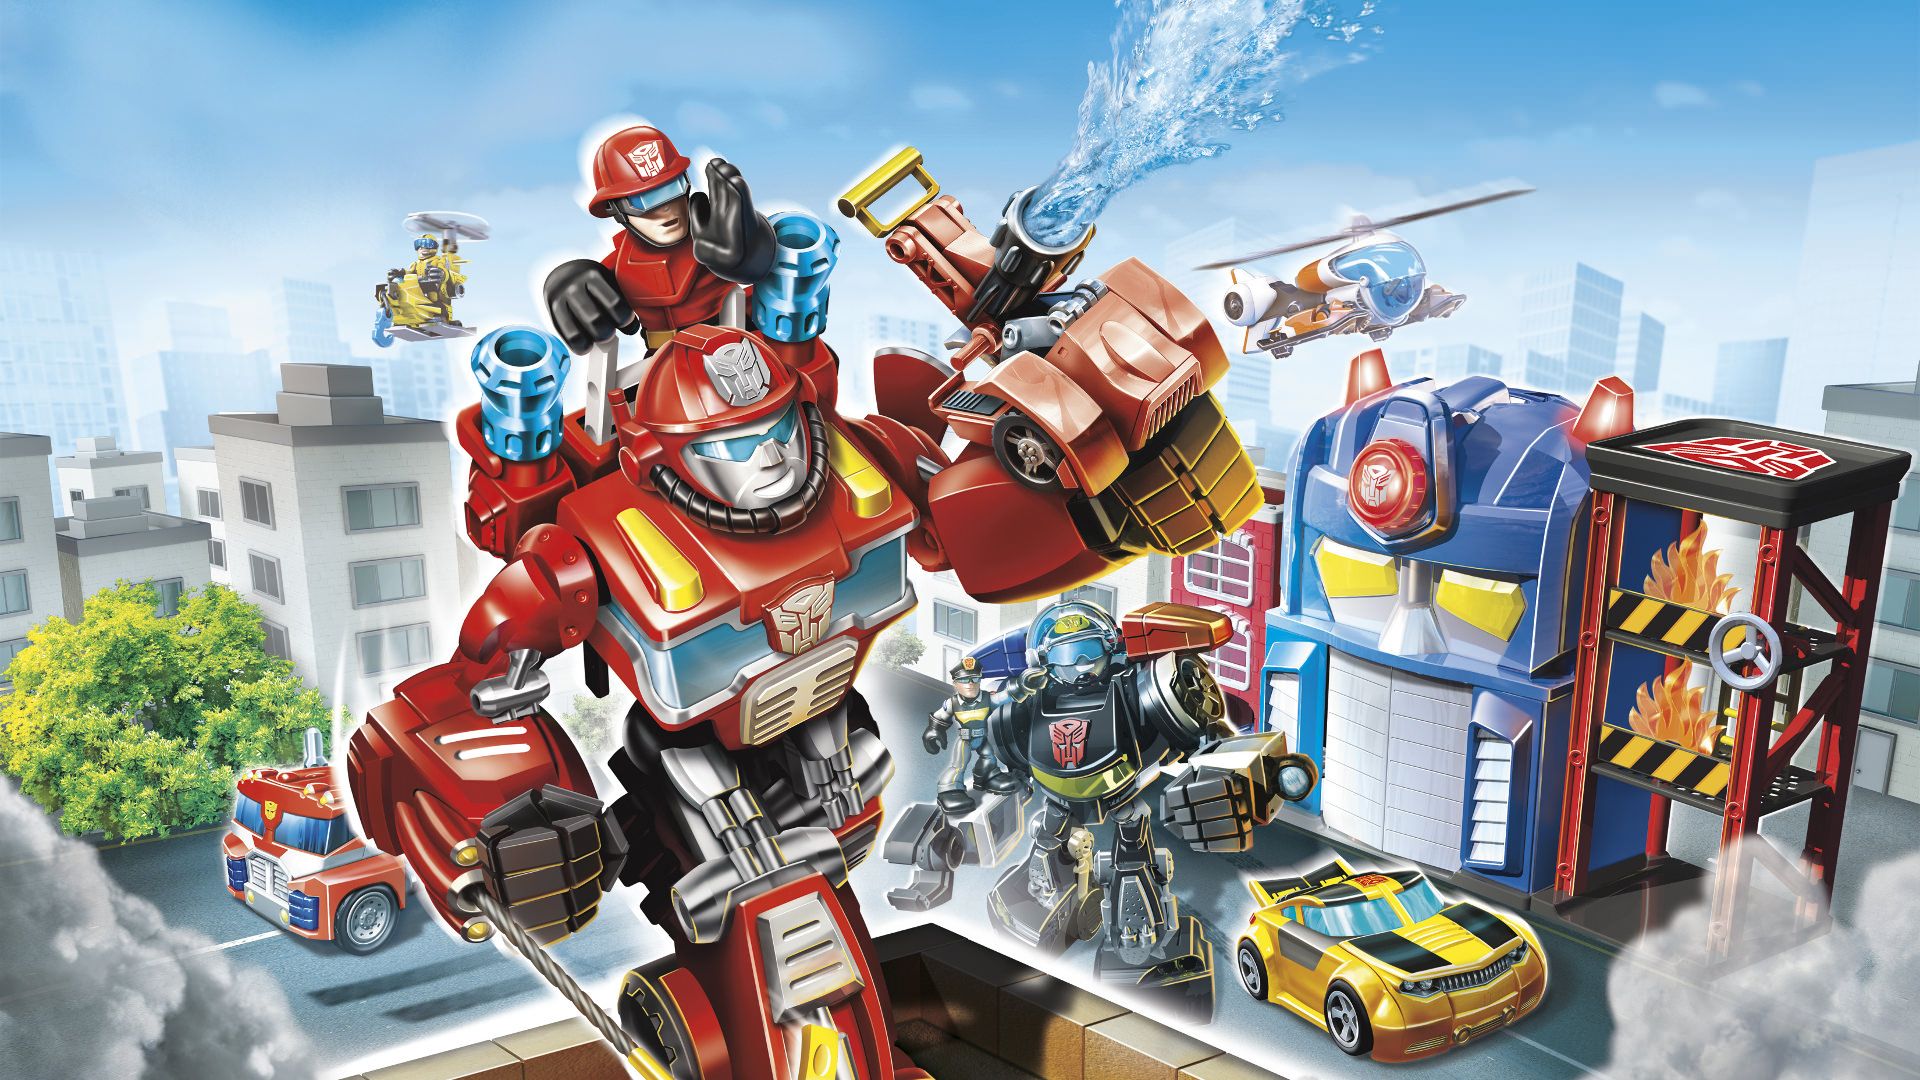 Transformers: Rescue Bots background